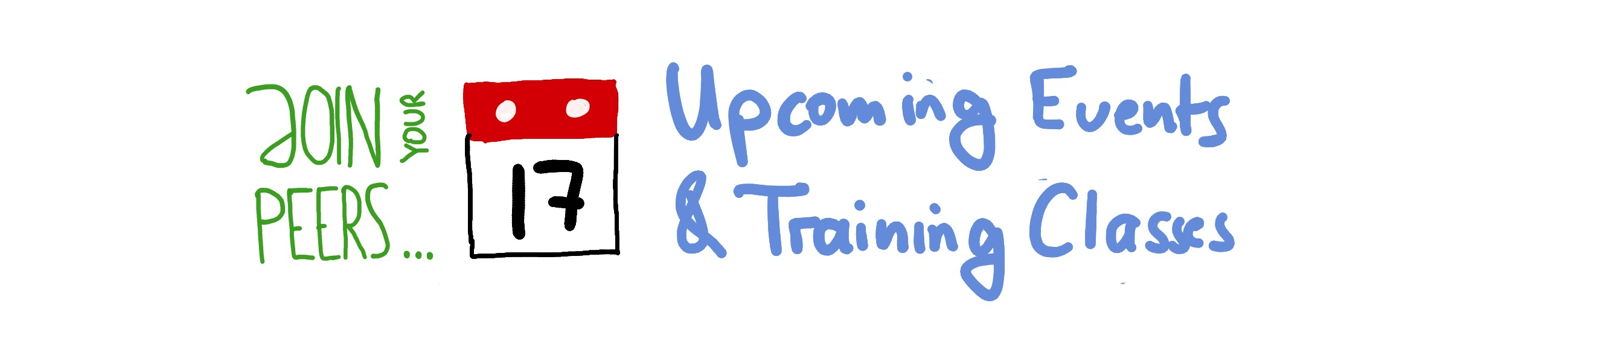 Upcoming Scrum and Liberating Stuctures Training Classes and Workshops